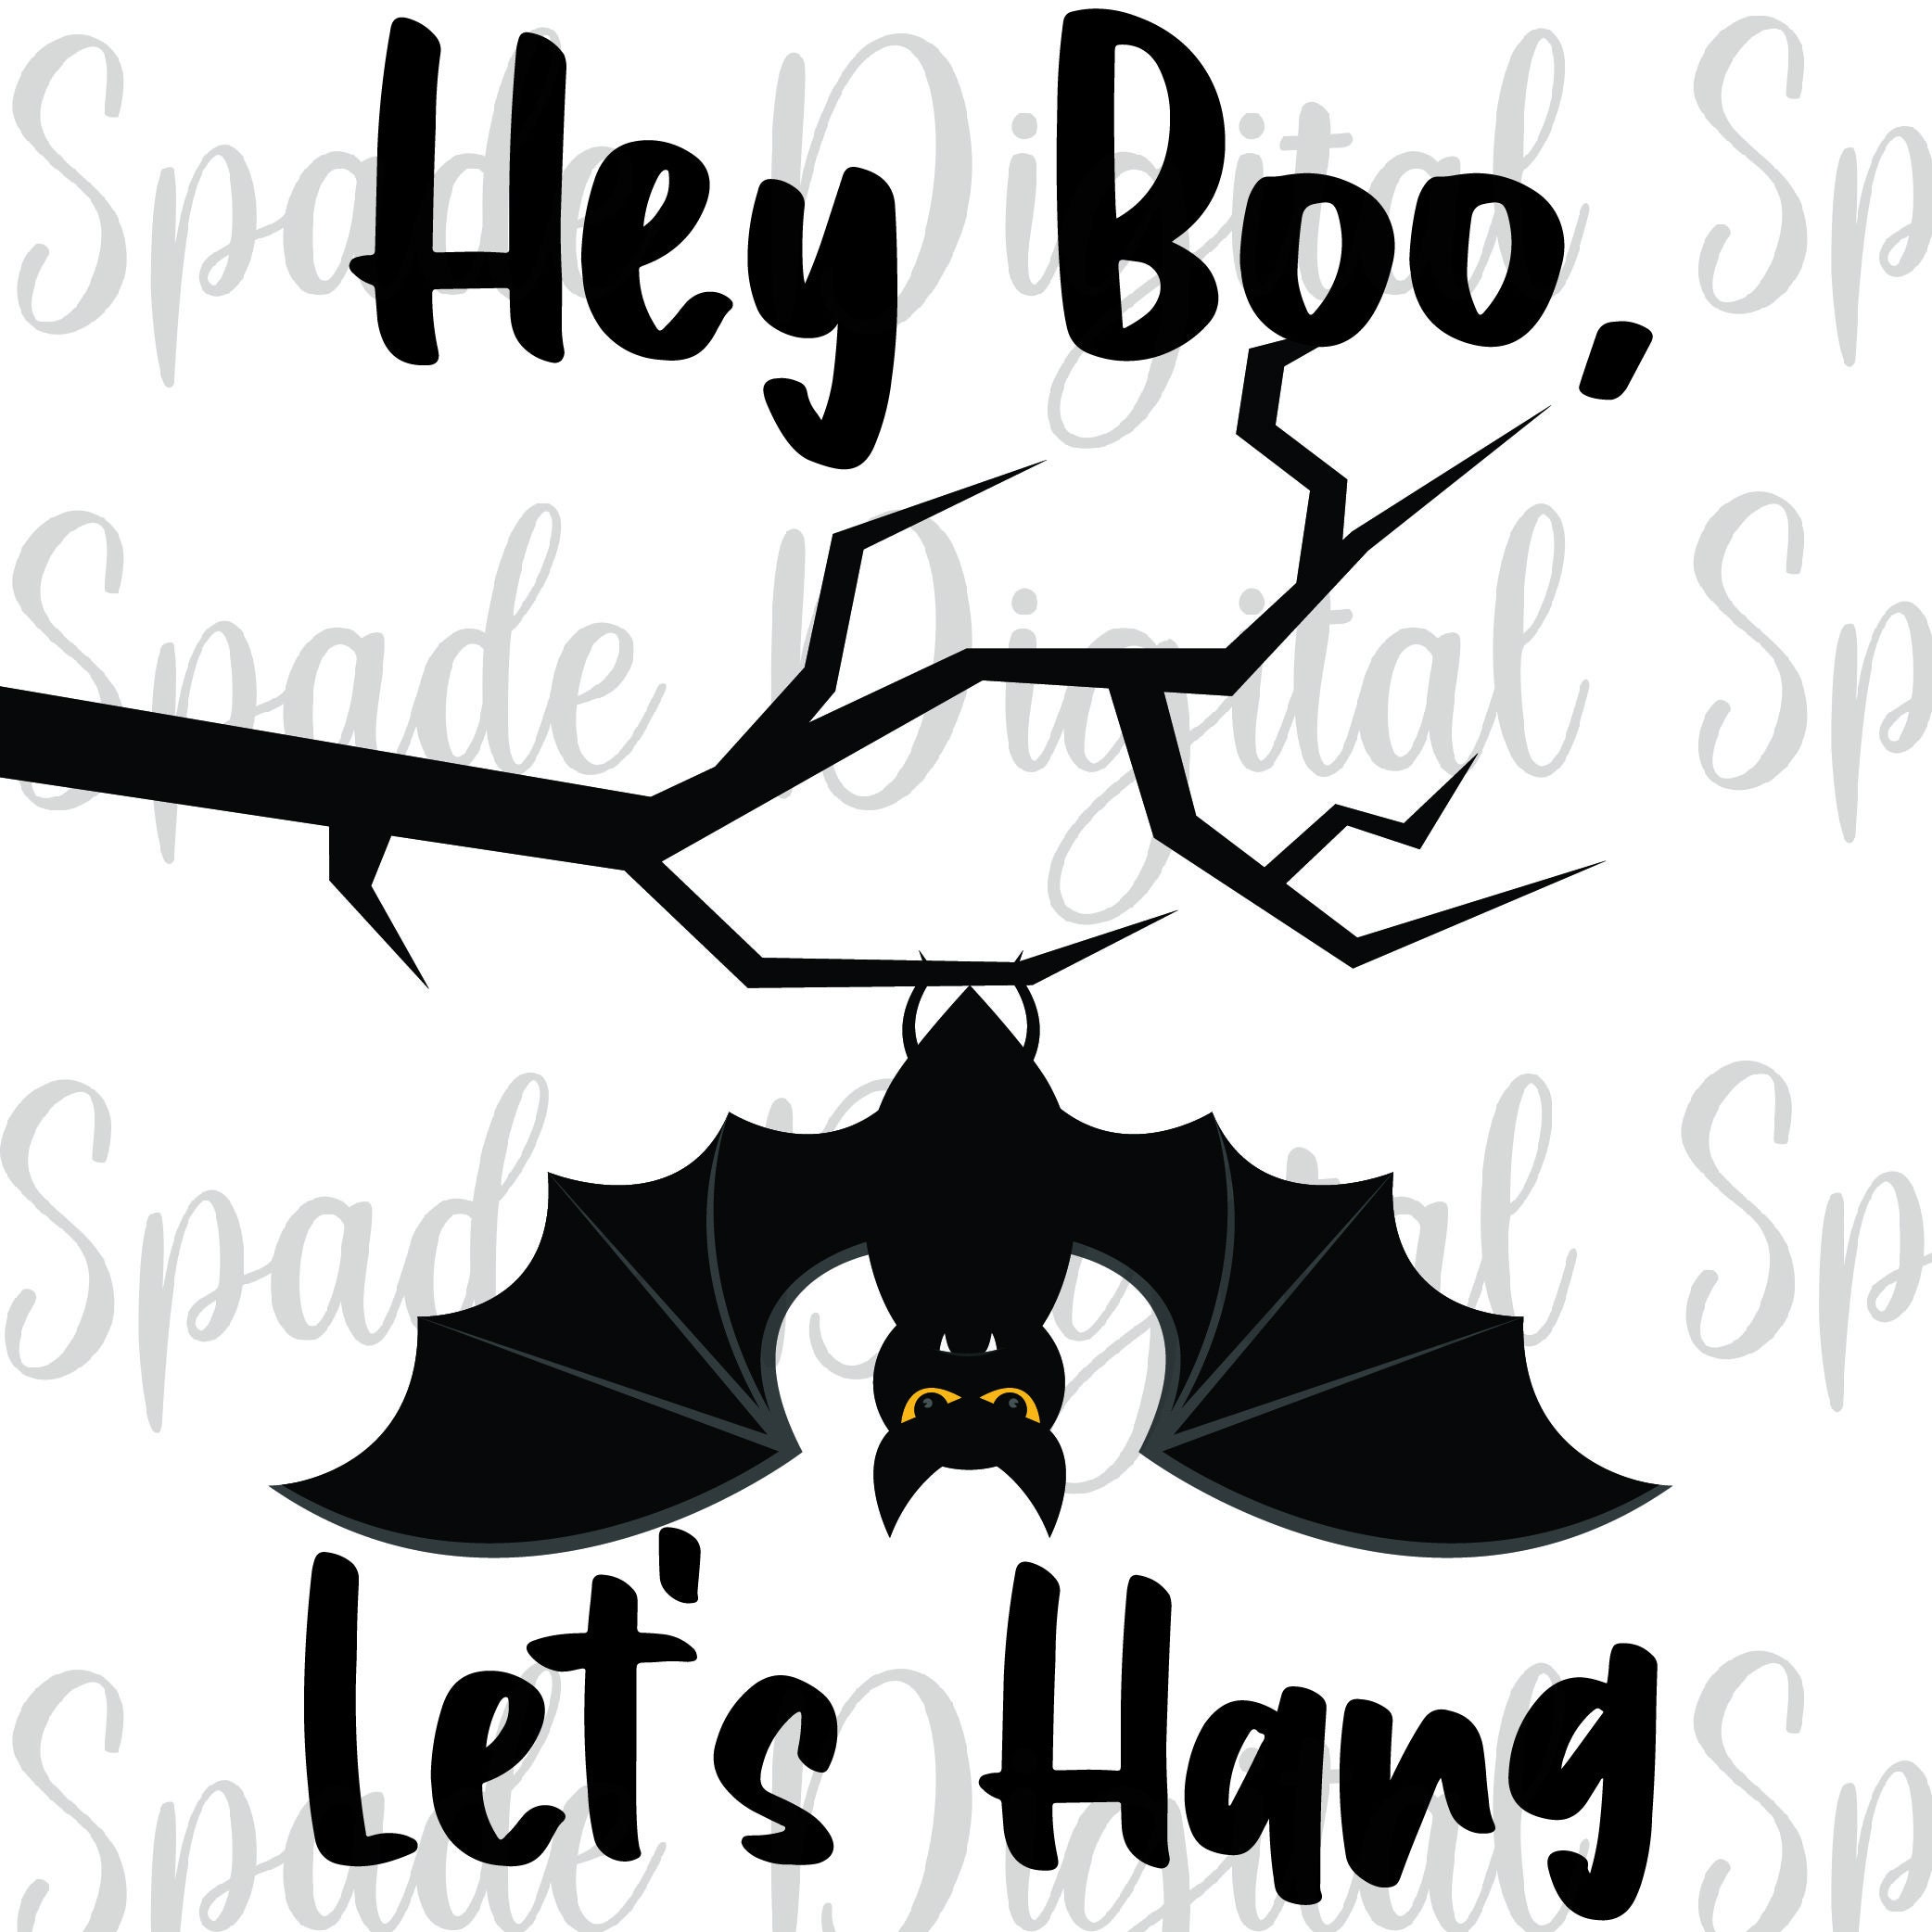 Hey Boo Let's Hang Svg Png Dxf Jpg Halloween Svg | Etsy